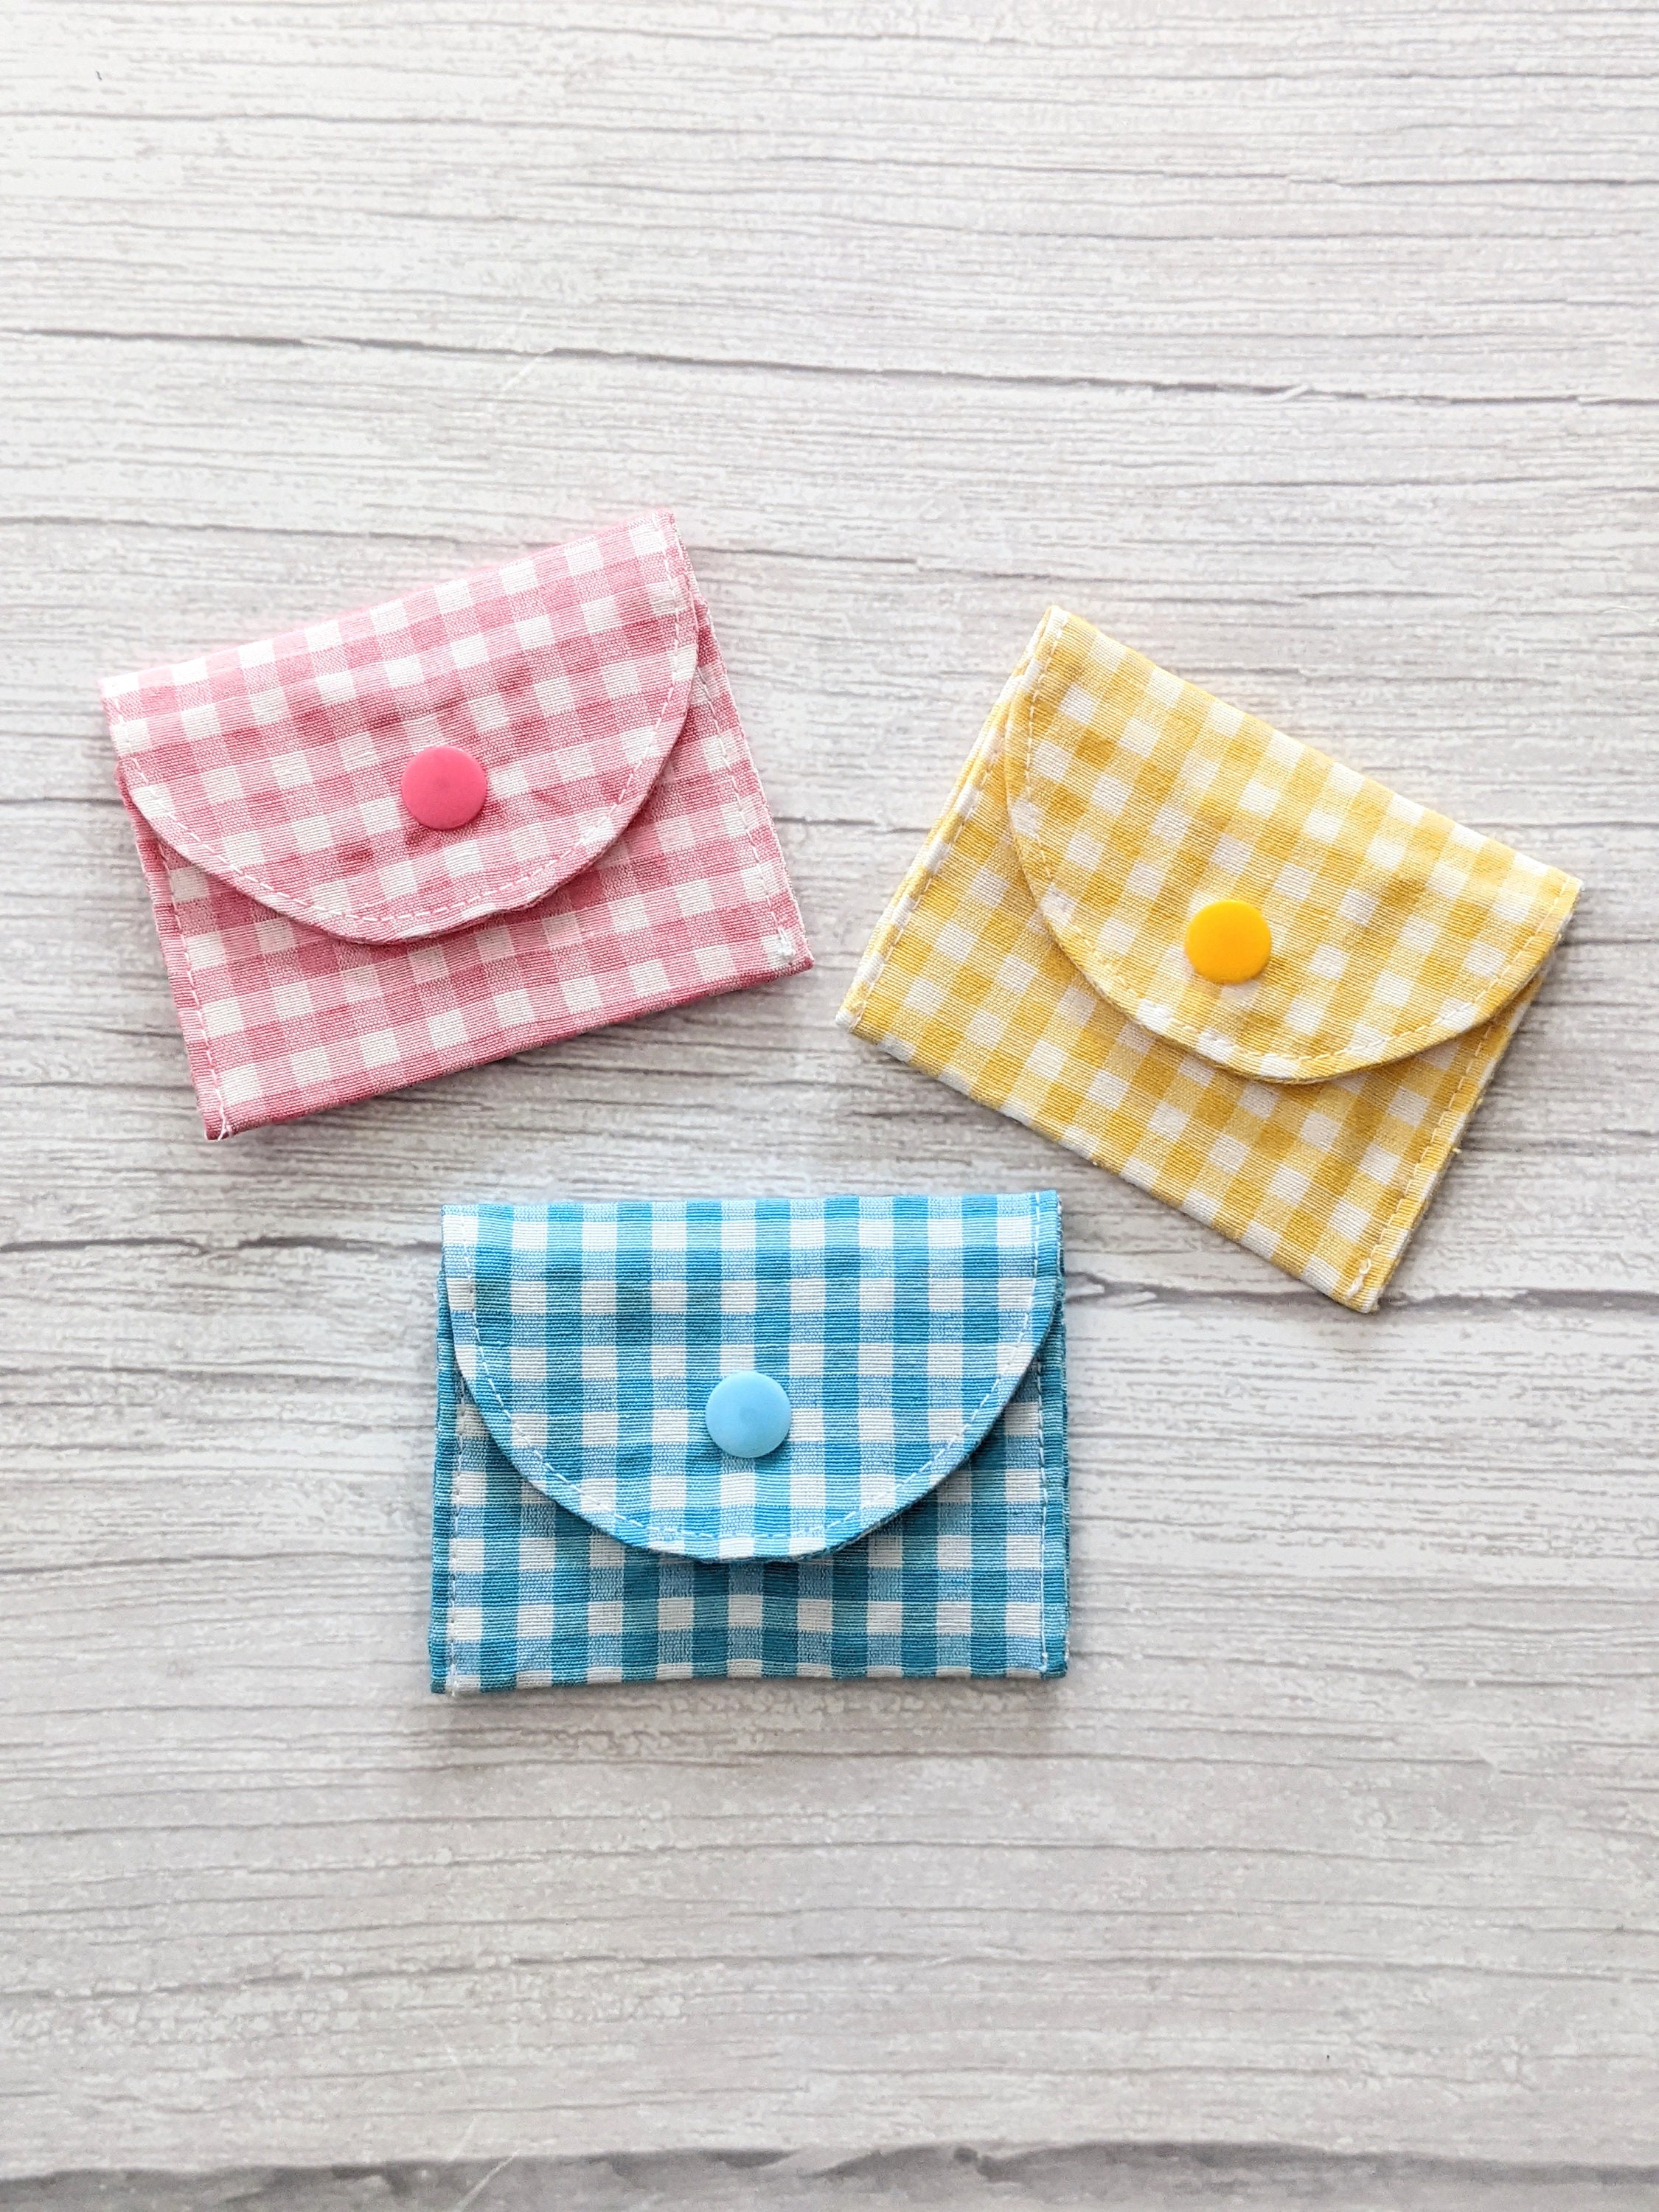 Tiny Cute Pouch With Popper Snap Fastening Made From Vegan Leather Can Be  Used as a Keyring More Colour Options Available 